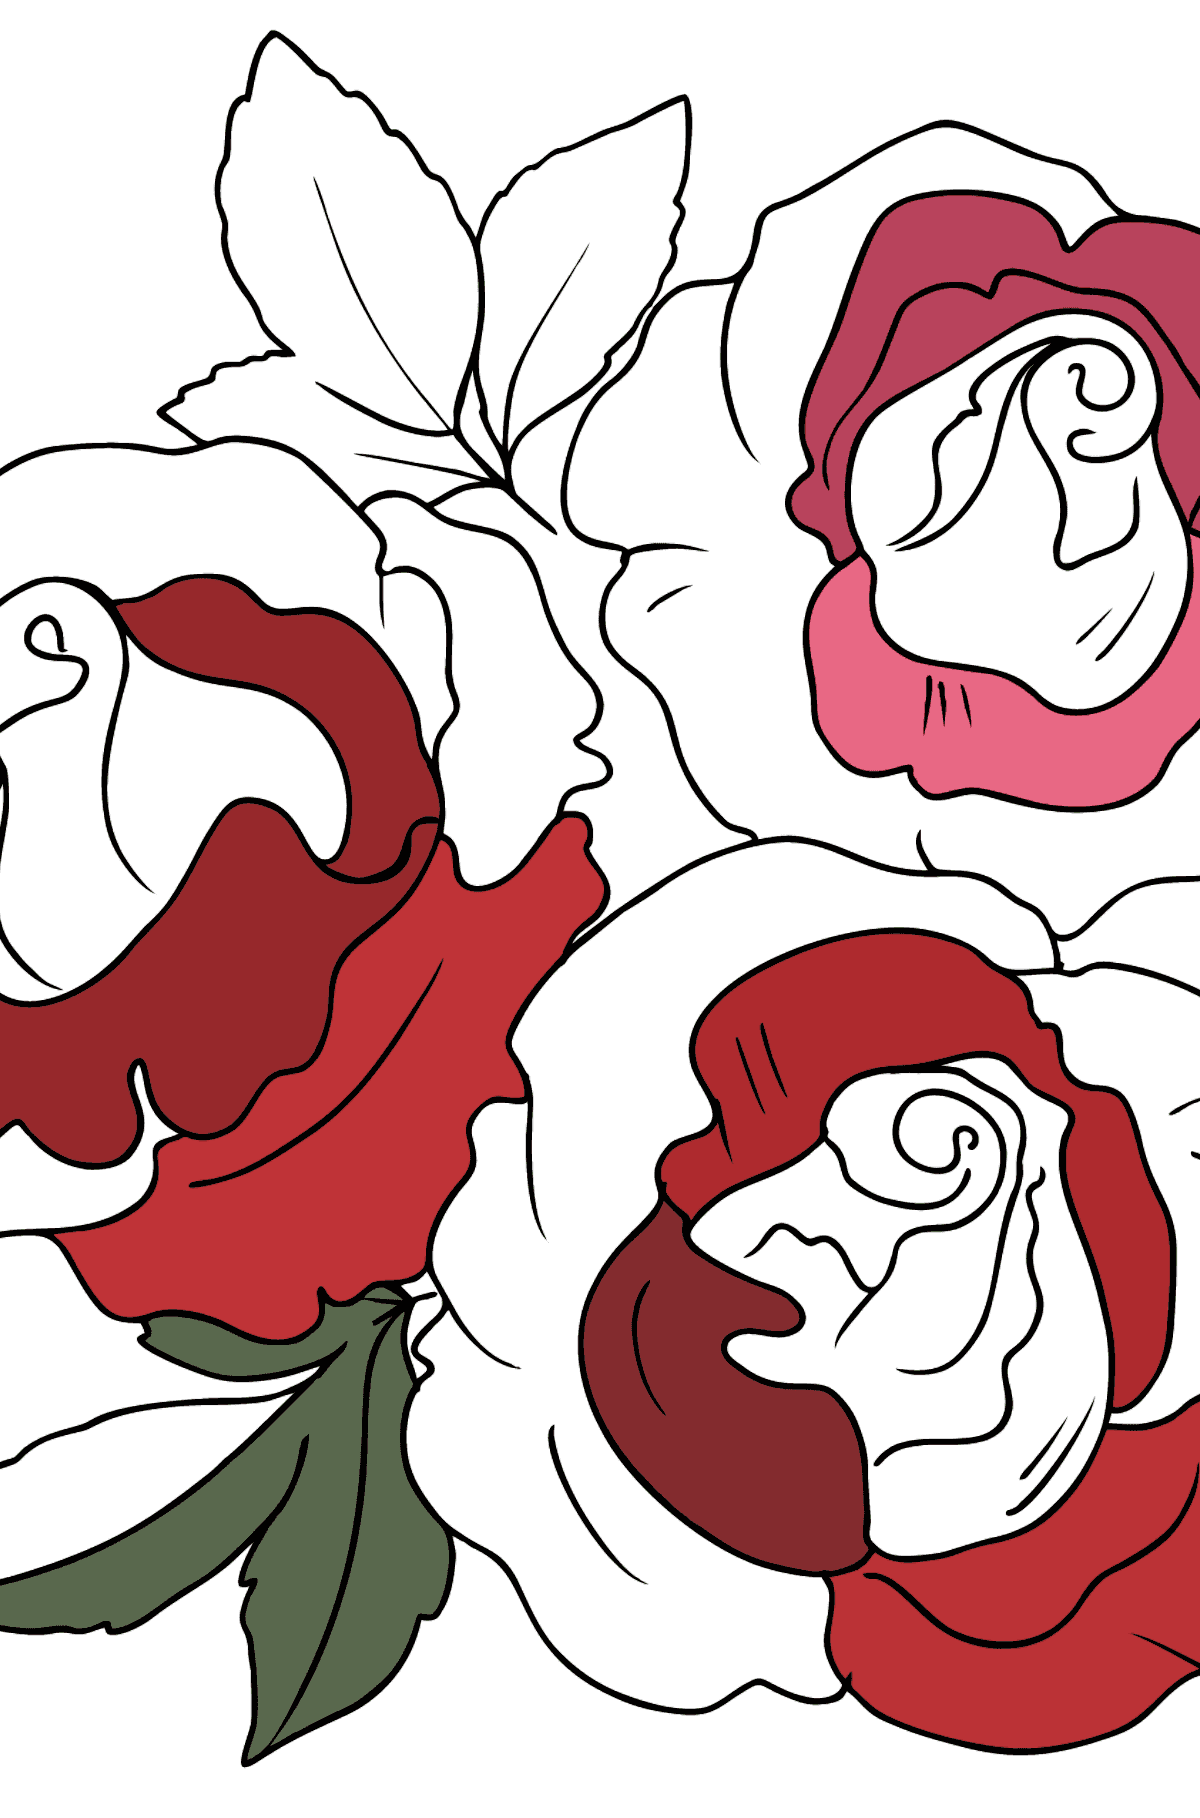 Roses Coloring Page - Coloring Pages for Kids